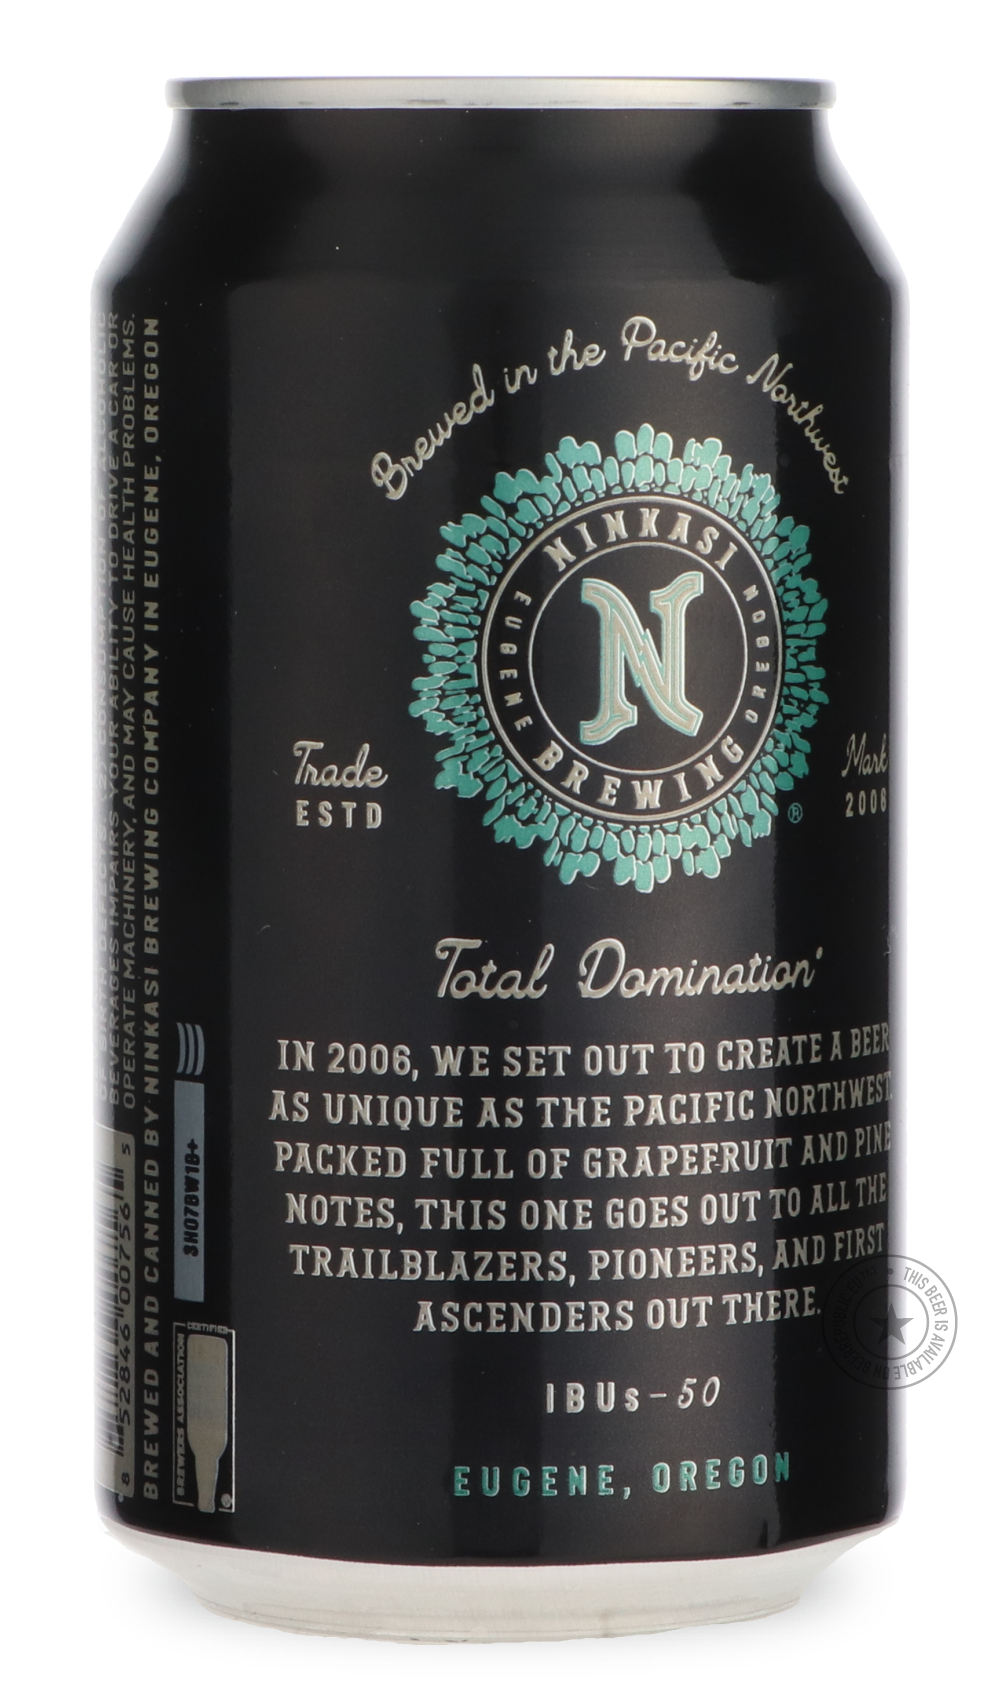 -Ninkasi- Total Domination-IPA- Only @ Beer Republic - The best online beer store for American & Canadian craft beer - Buy beer online from the USA and Canada - Bier online kopen - Amerikaans bier kopen - Craft beer store - Craft beer kopen - Amerikanisch bier kaufen - Bier online kaufen - Acheter biere online - IPA - Stout - Porter - New England IPA - Hazy IPA - Imperial Stout - Barrel Aged - Barrel Aged Imperial Stout - Brown - Dark beer - Blond - Blonde - Pilsner - Lager - Wheat - Weizen - Amber - Barley